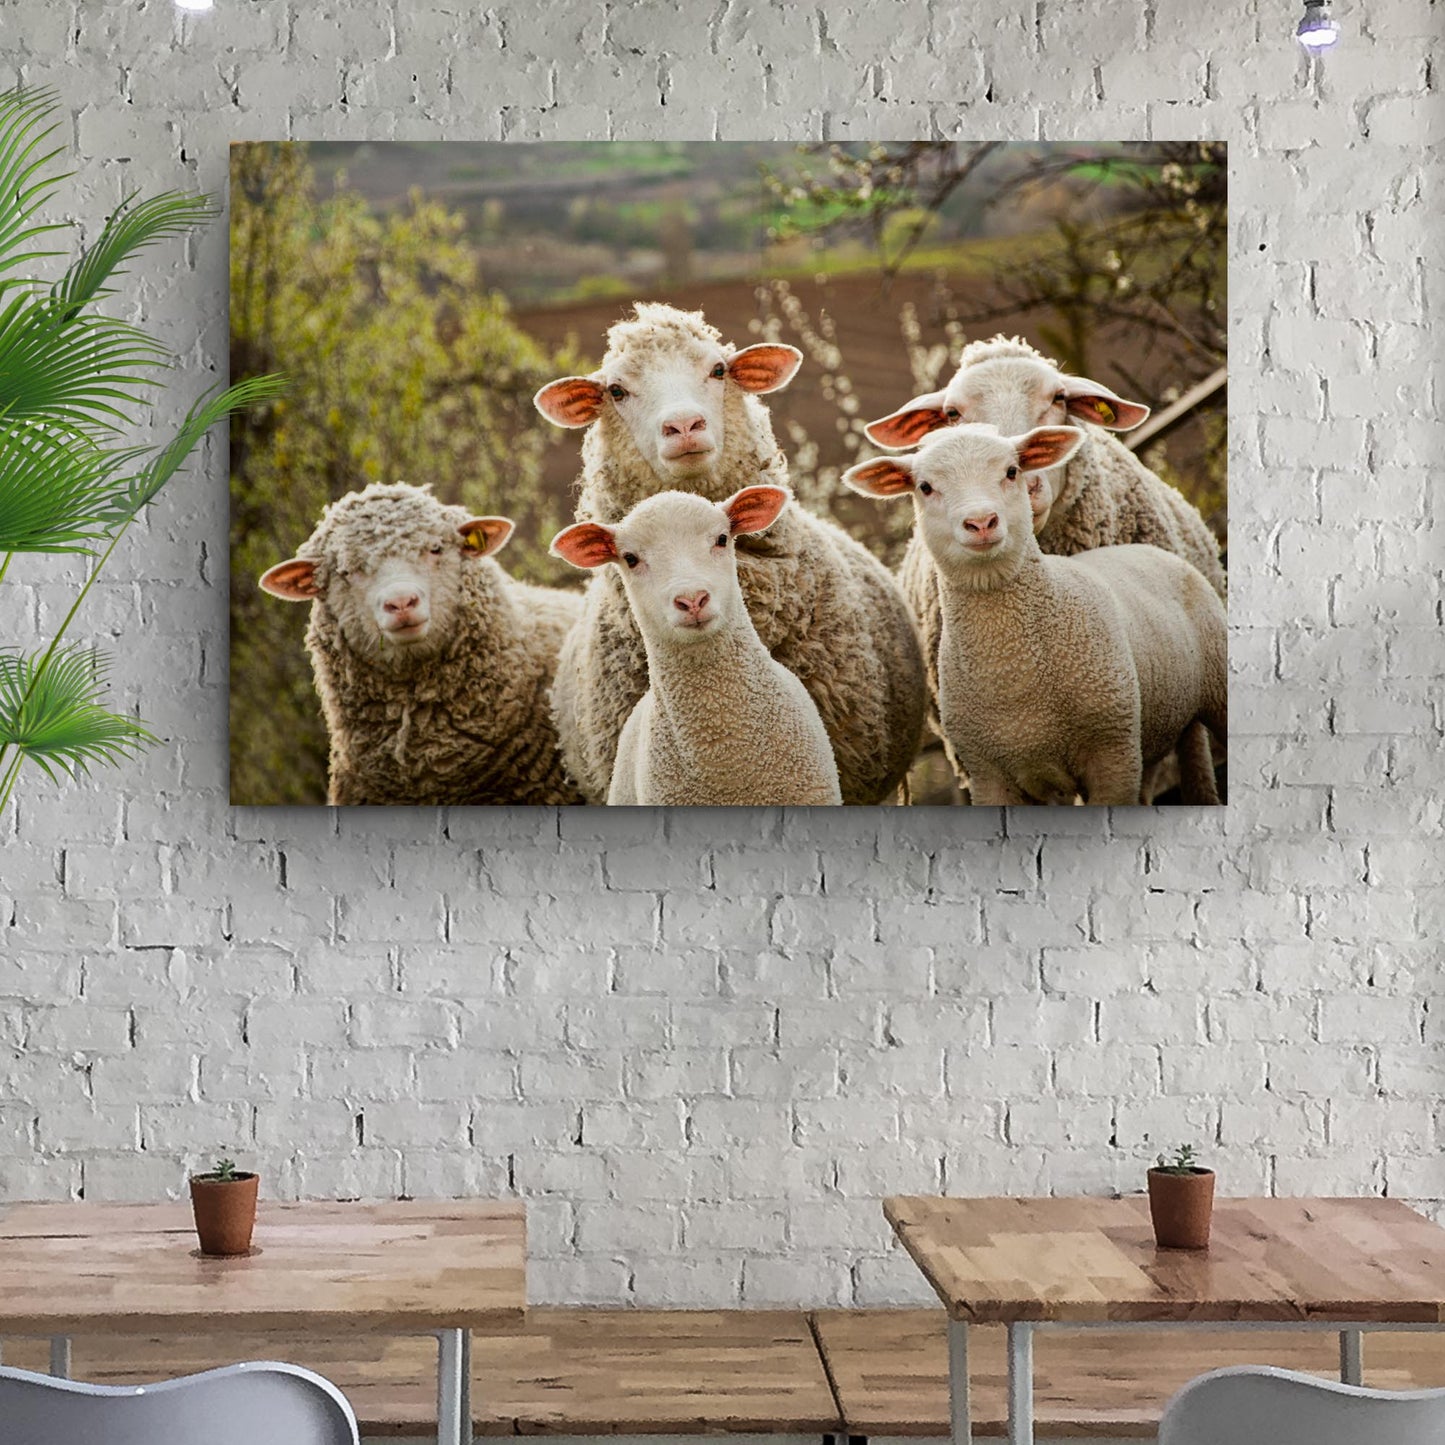 Curious Sheep Canvas Wall Art Style 2 - Image by Tailored Canvases